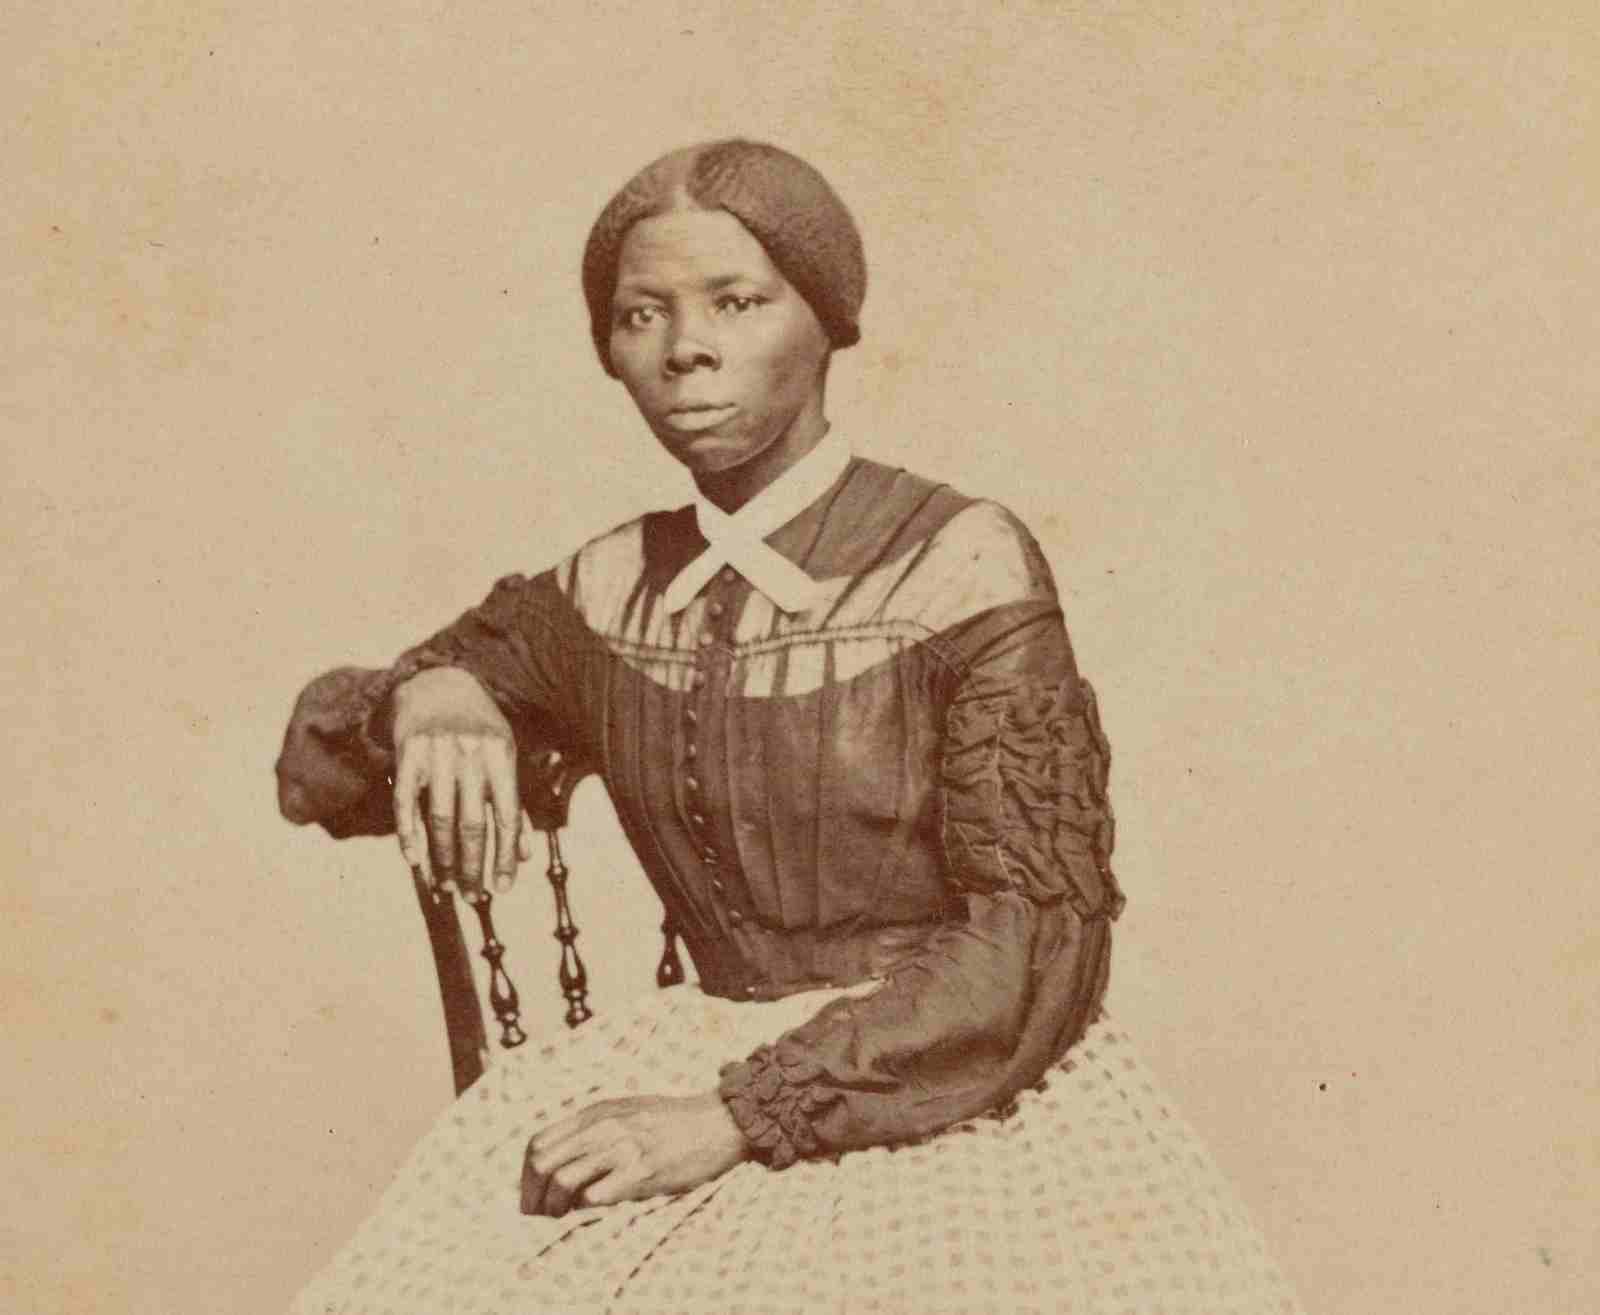 Harriet Tubman. Image source: Smithsonian's National Museum of African American History and Culture.